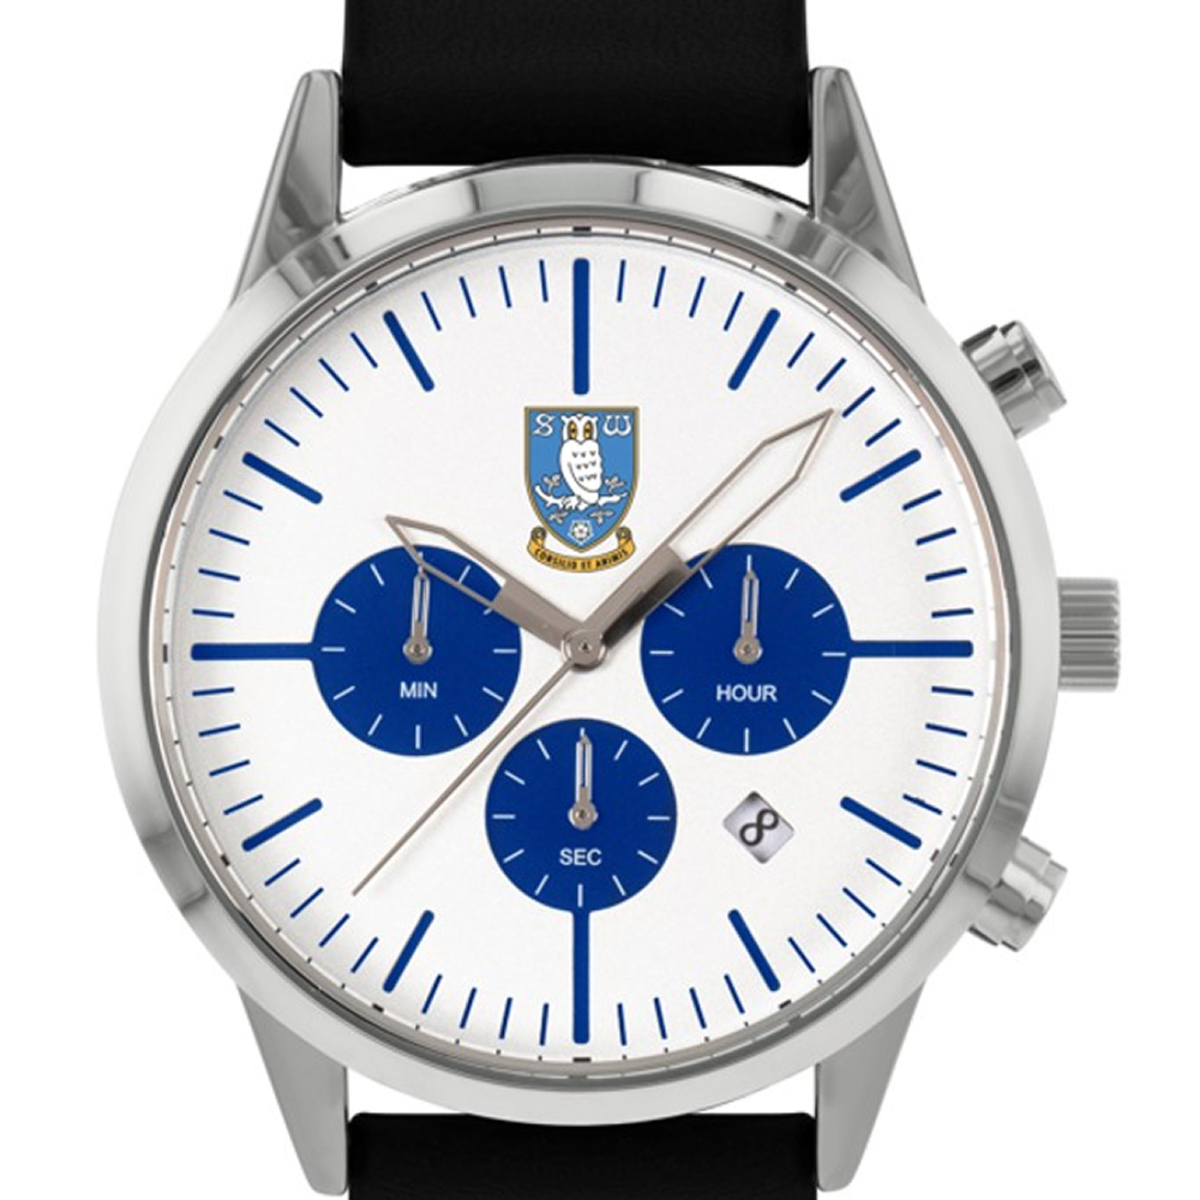 SWFC Chronograph Leather Strap - Sheffield Wednesday Superstore